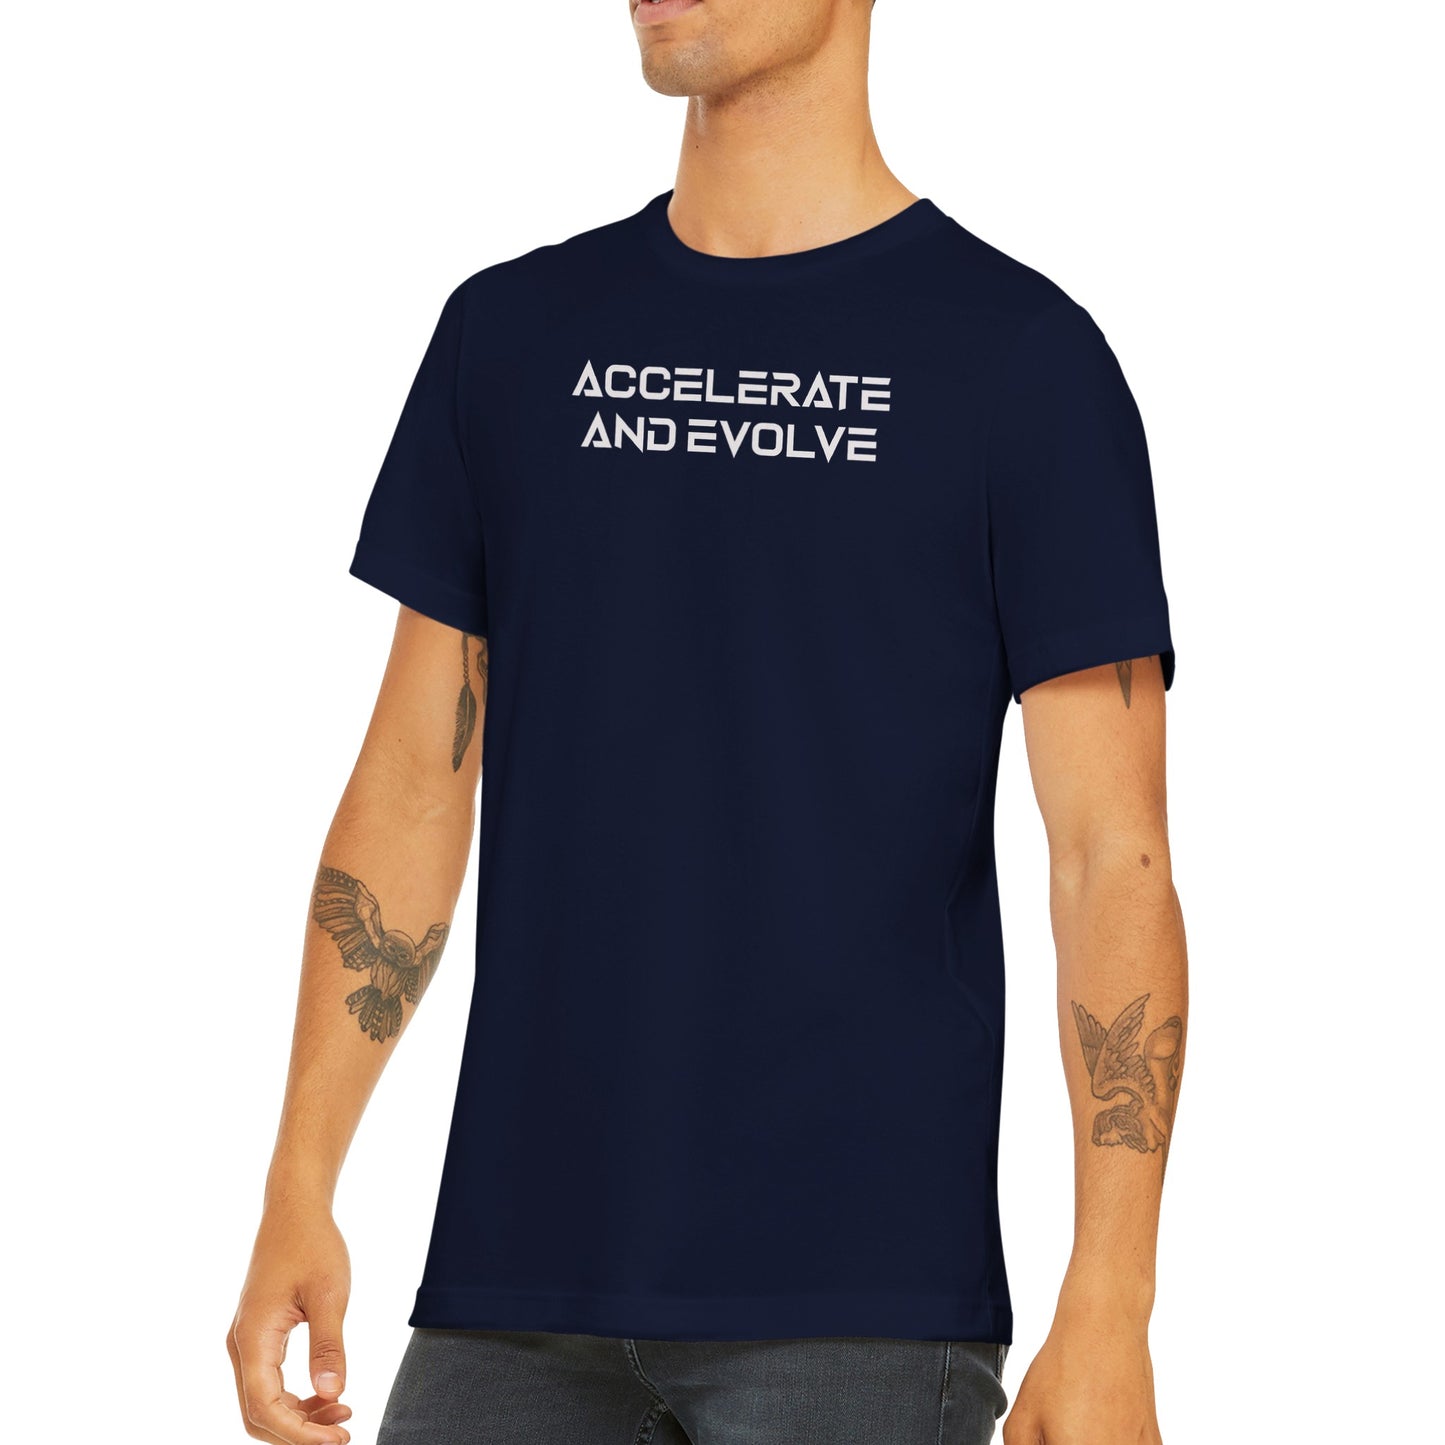 "Accelerate and Evolve" Tee